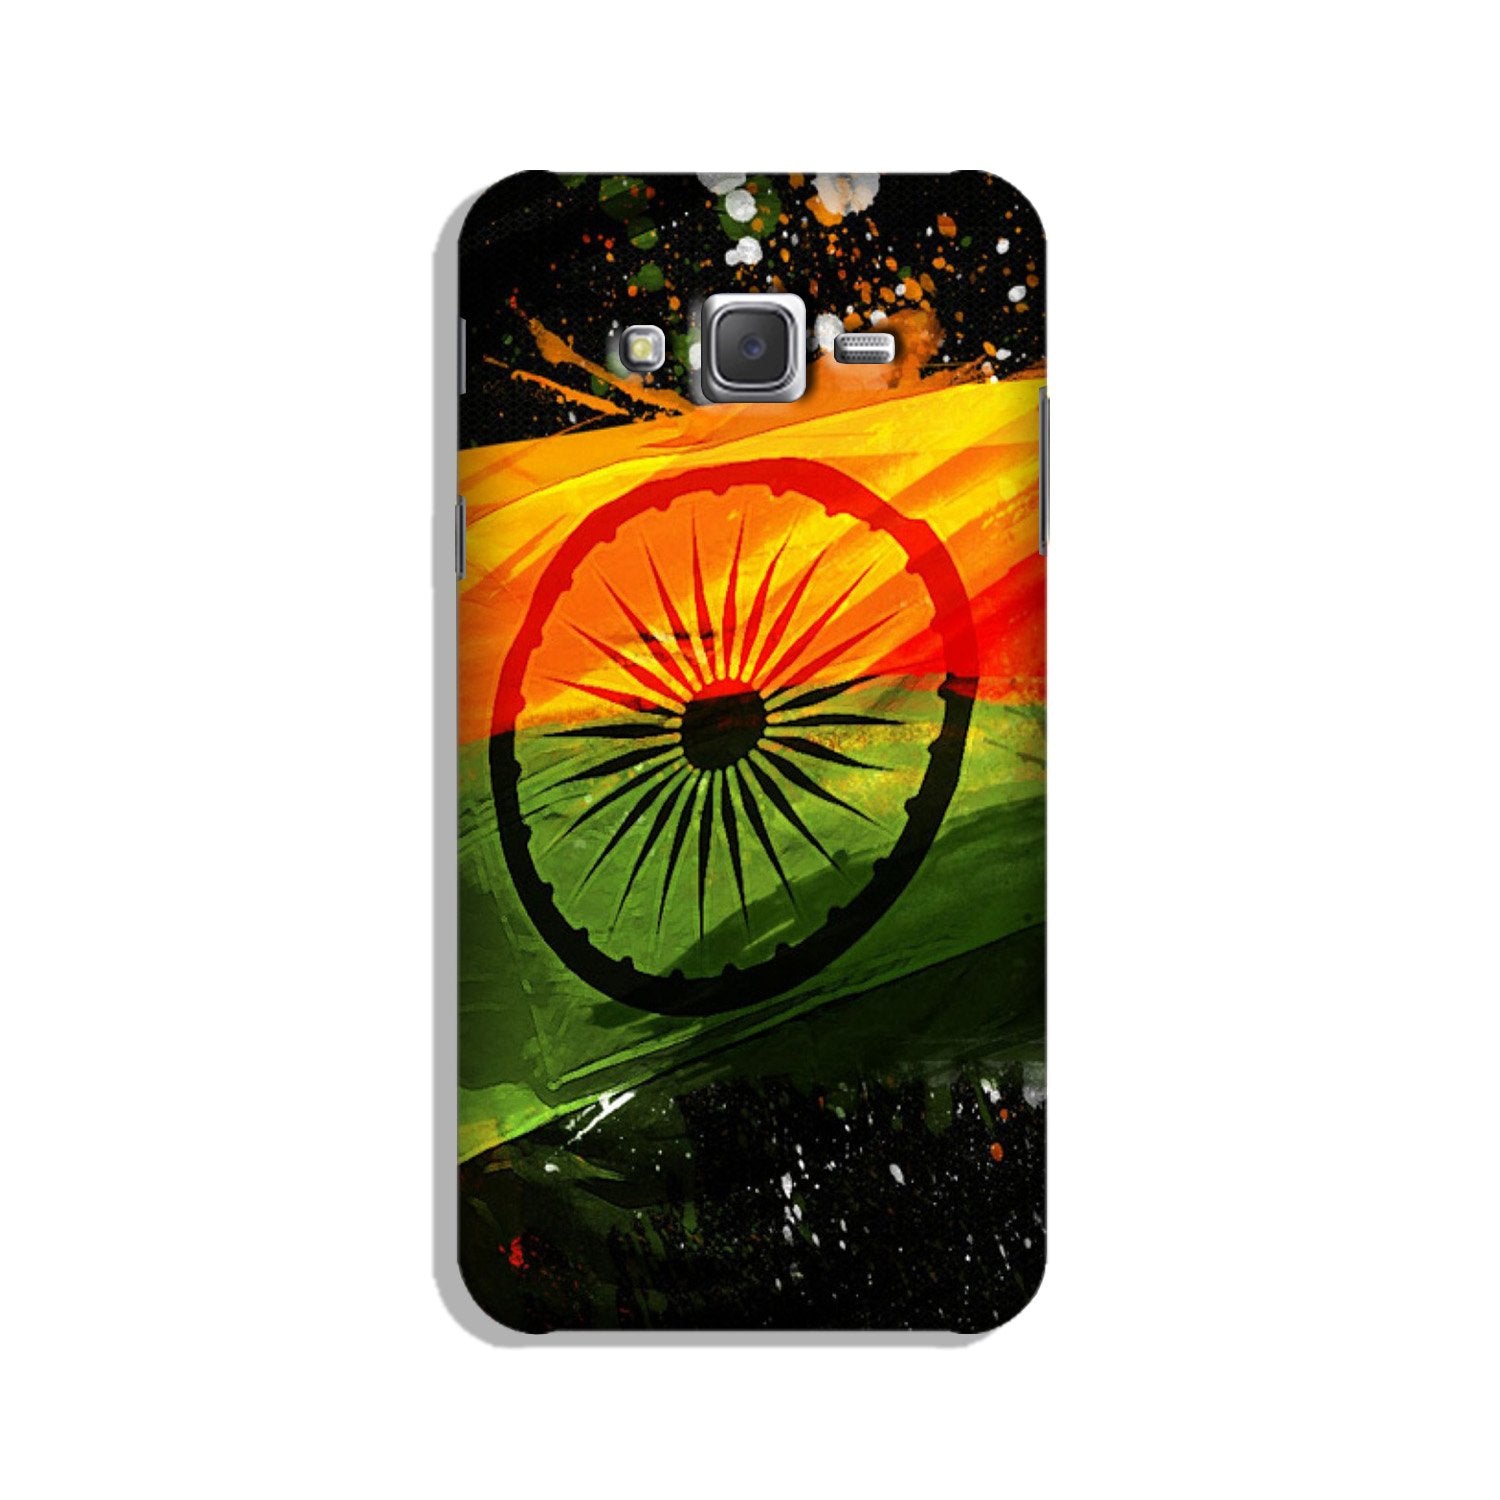 Indian Flag Case for Galaxy J7 Nxt  (Design - 137)